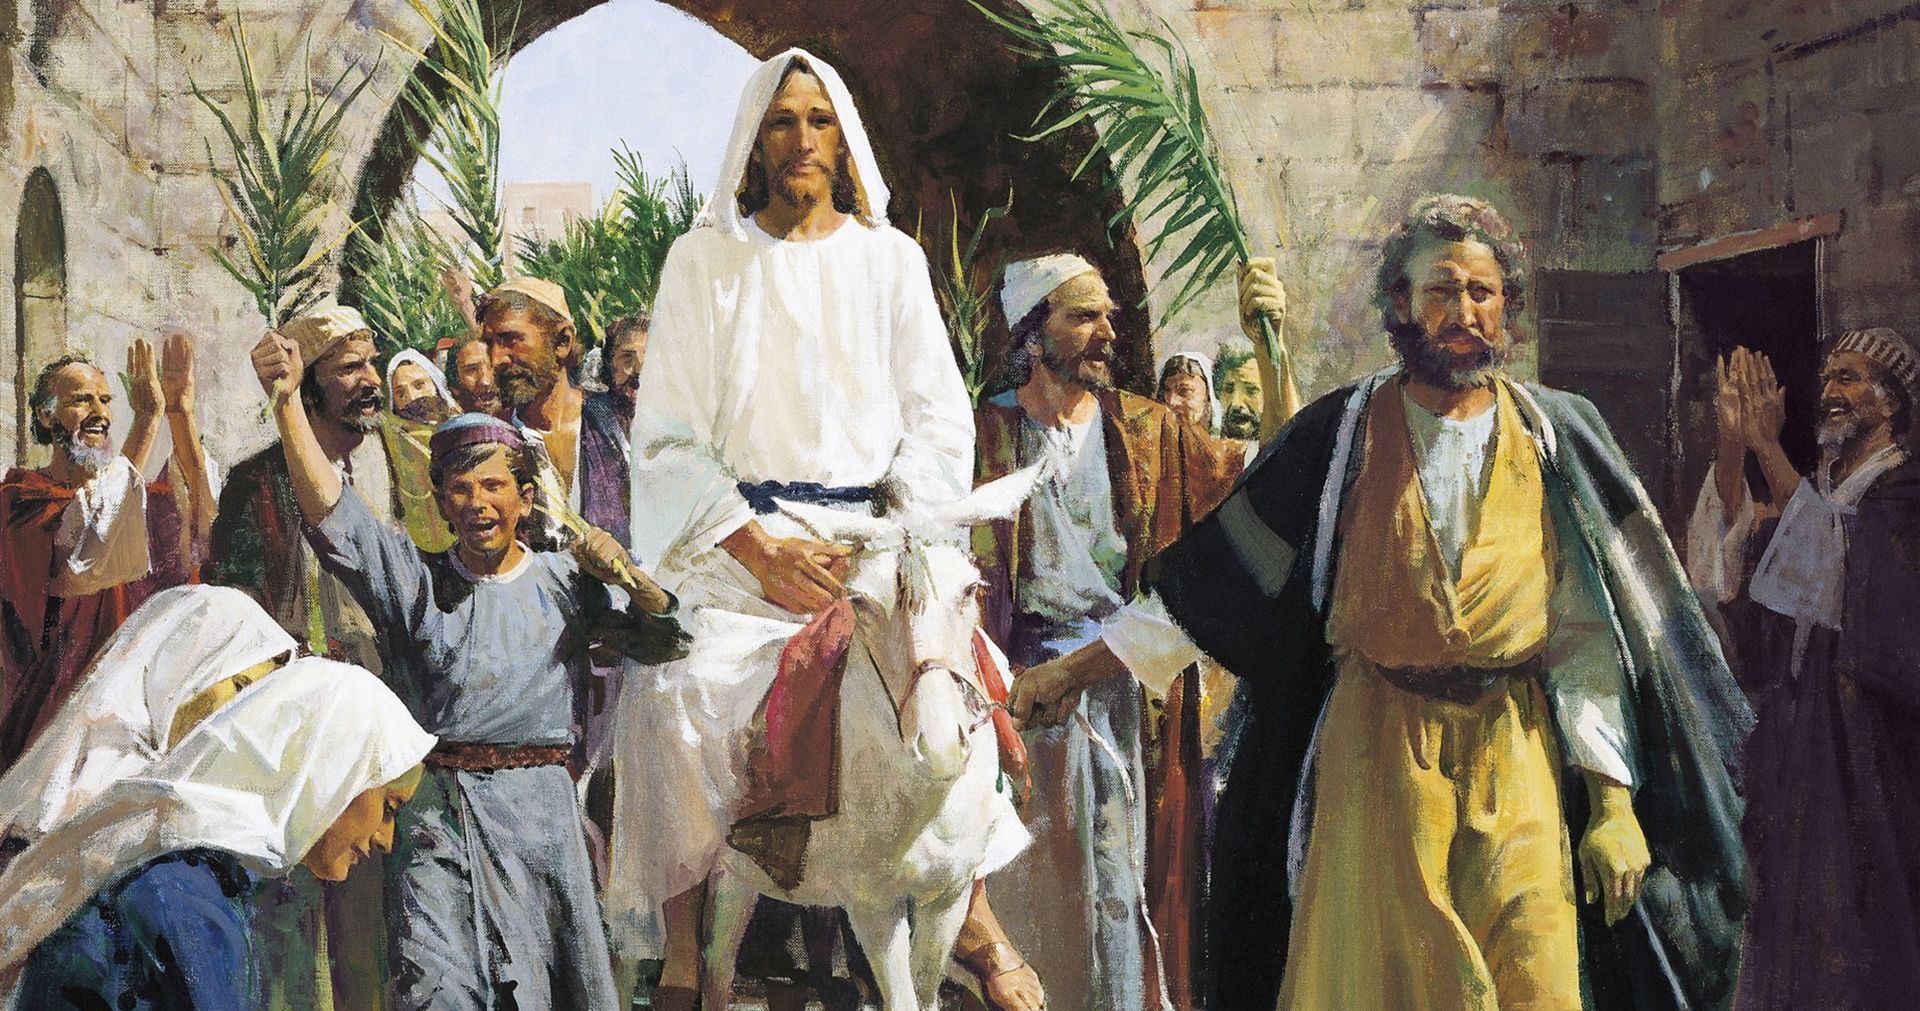 Painting of Jesus Christ riding a white donkey through a crowd of cheering people, some of whom are waving palm fronds.